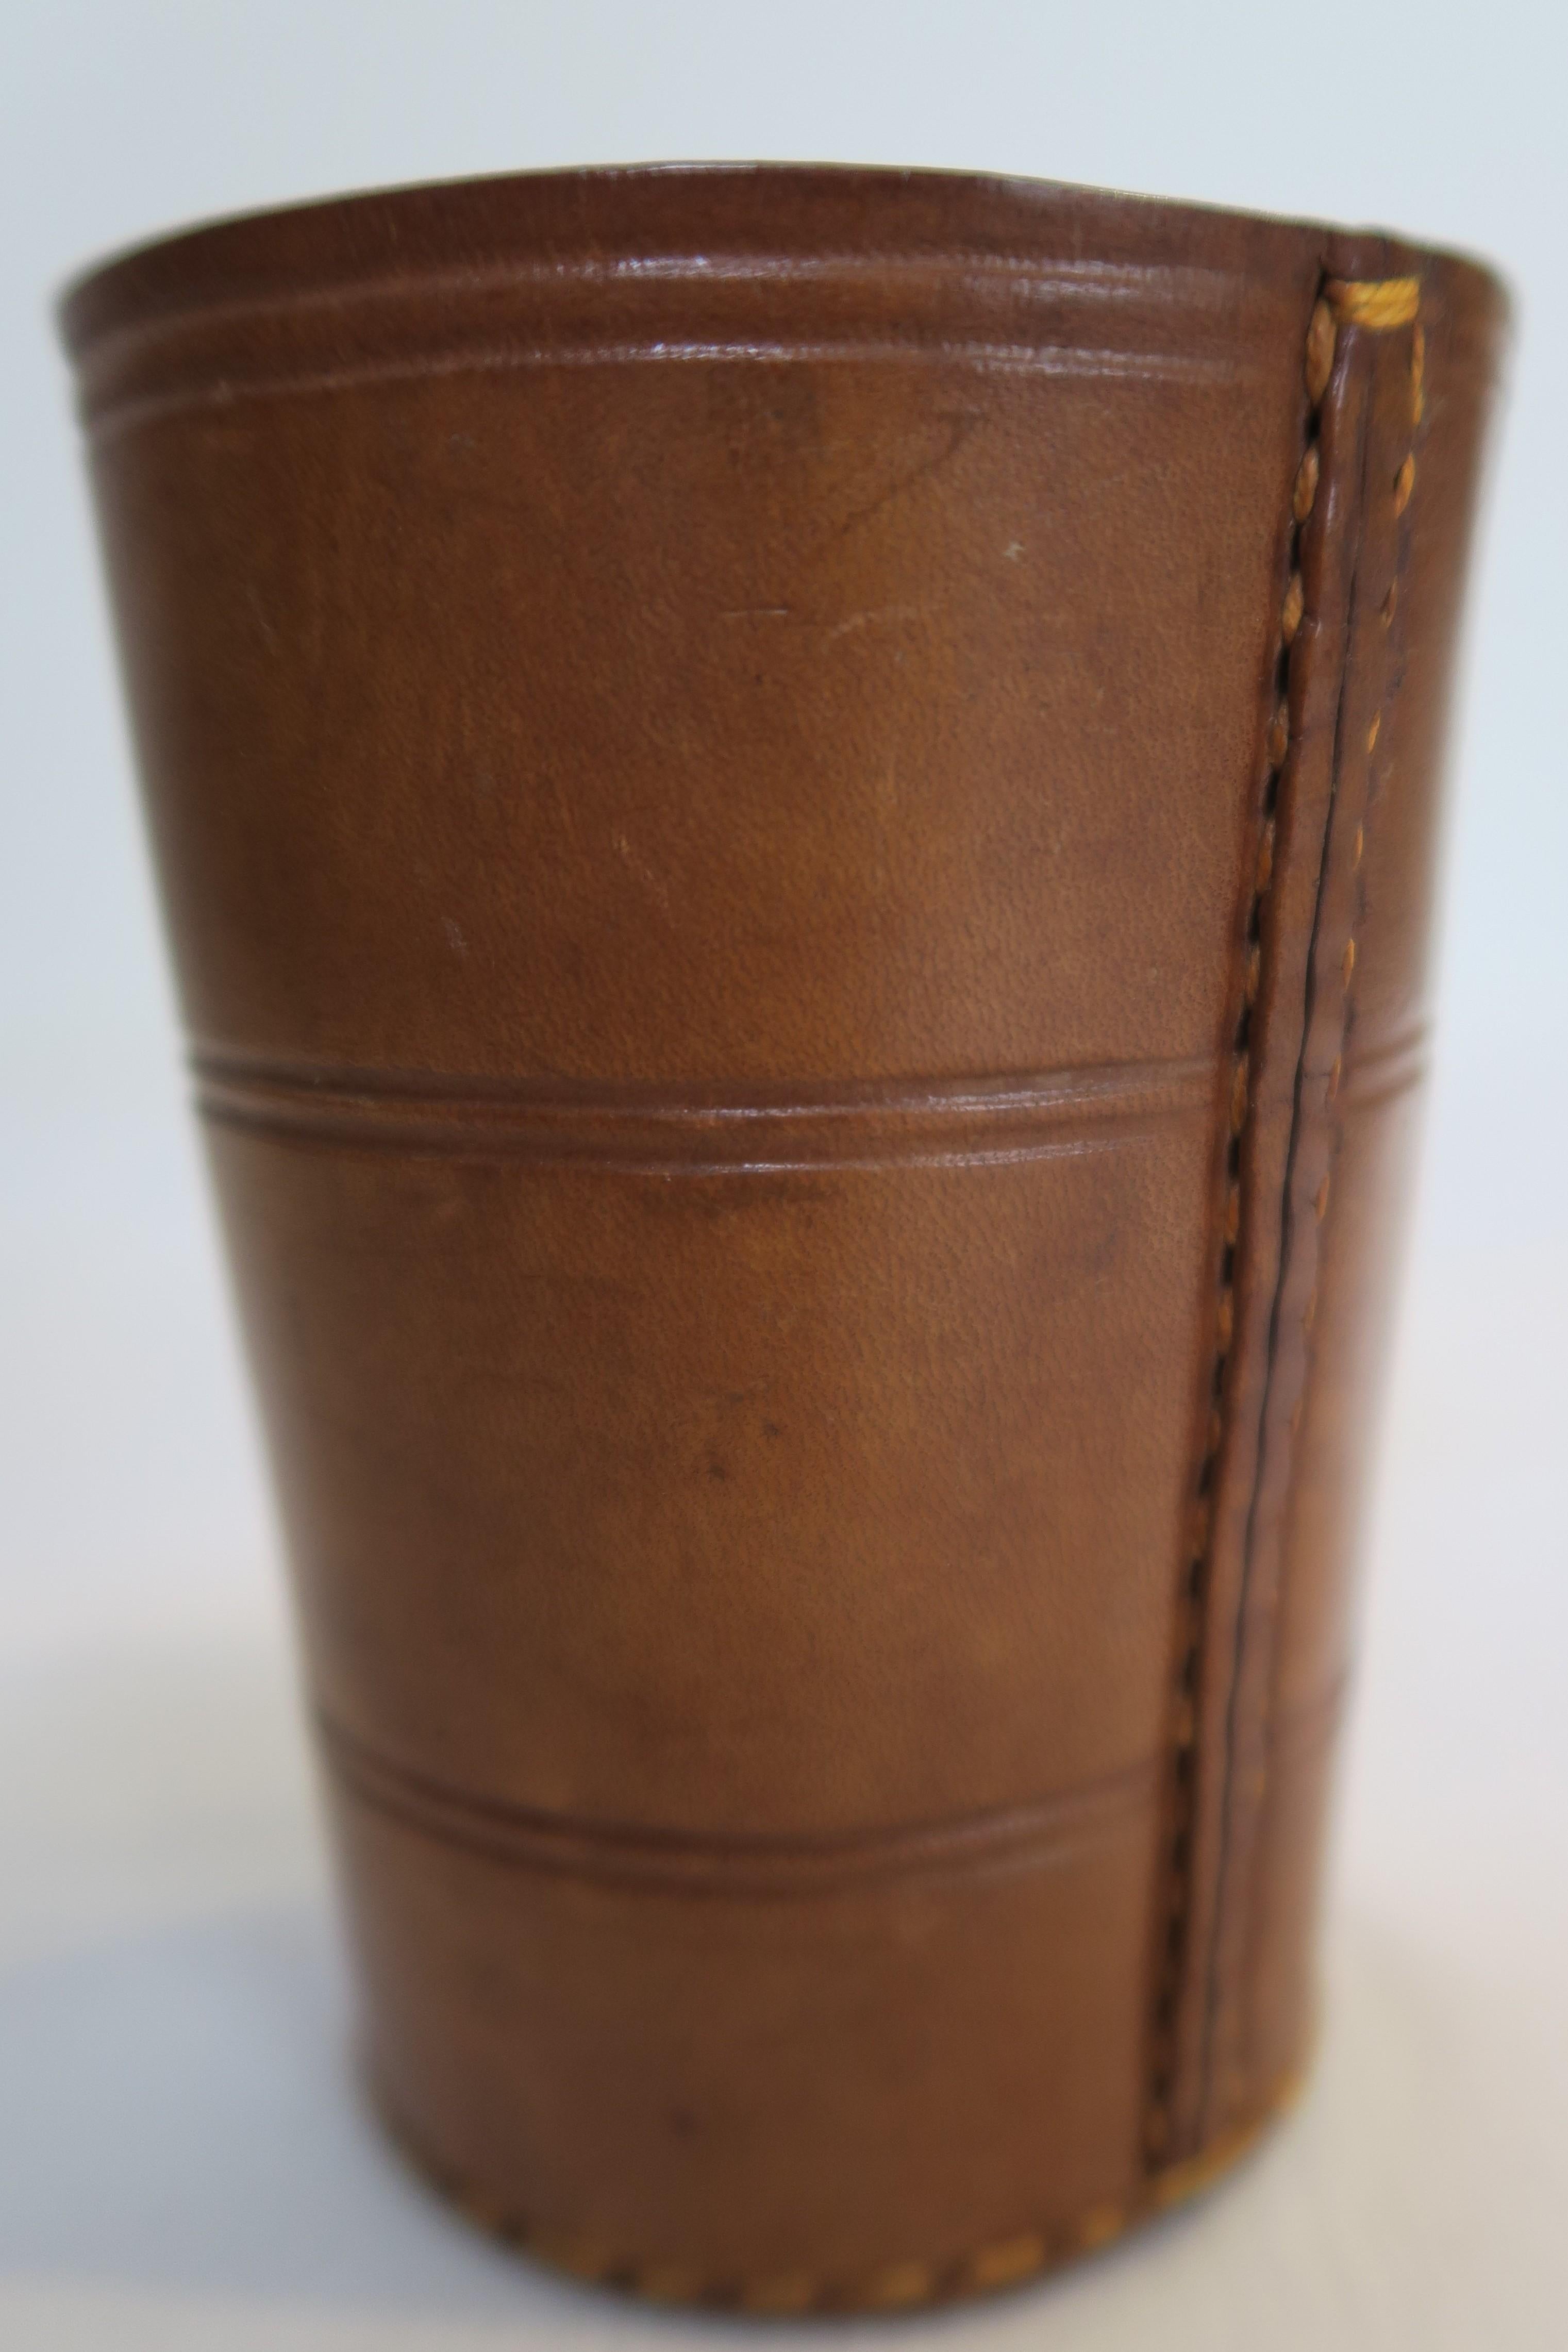 Set of 5 Dice and Leather Dice Cup with Mahogany Tray 1